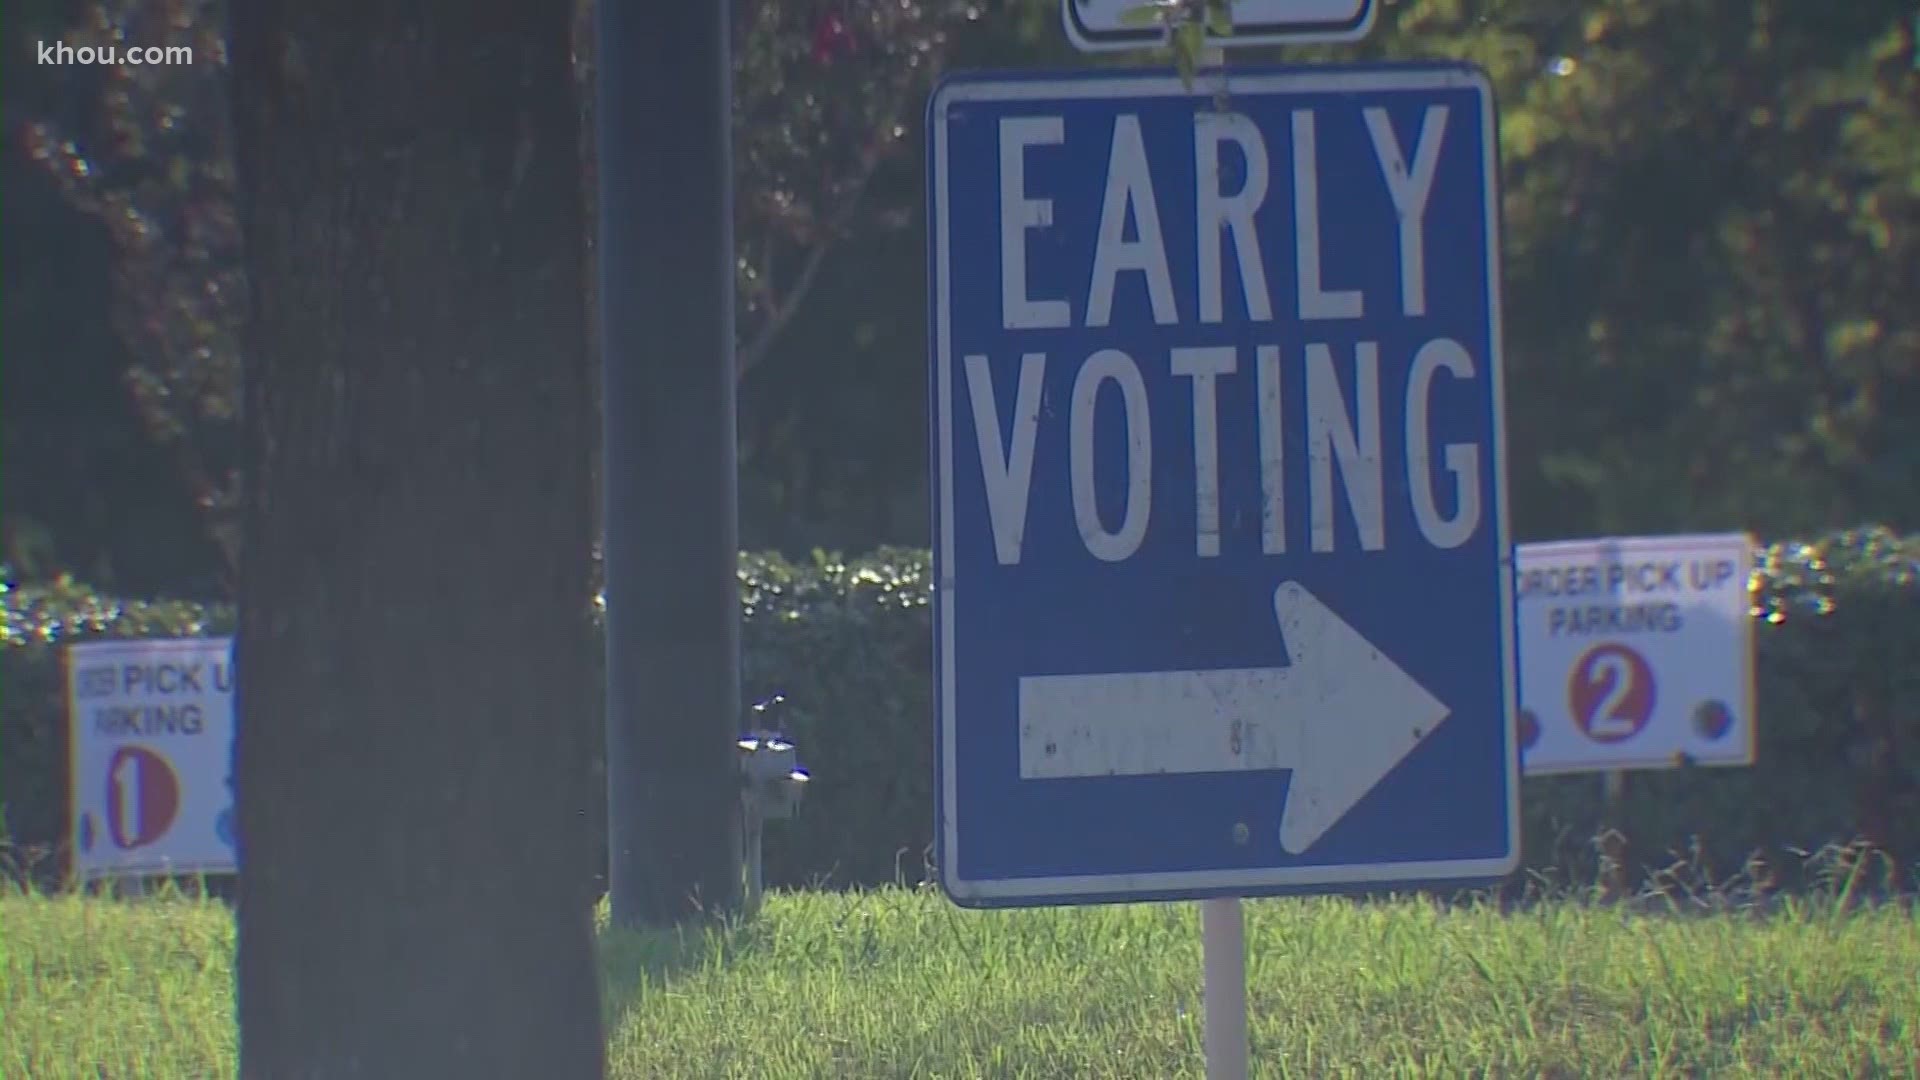 More than 100,000 ballots already cast on Day 1 of early voting with a few hours to go.